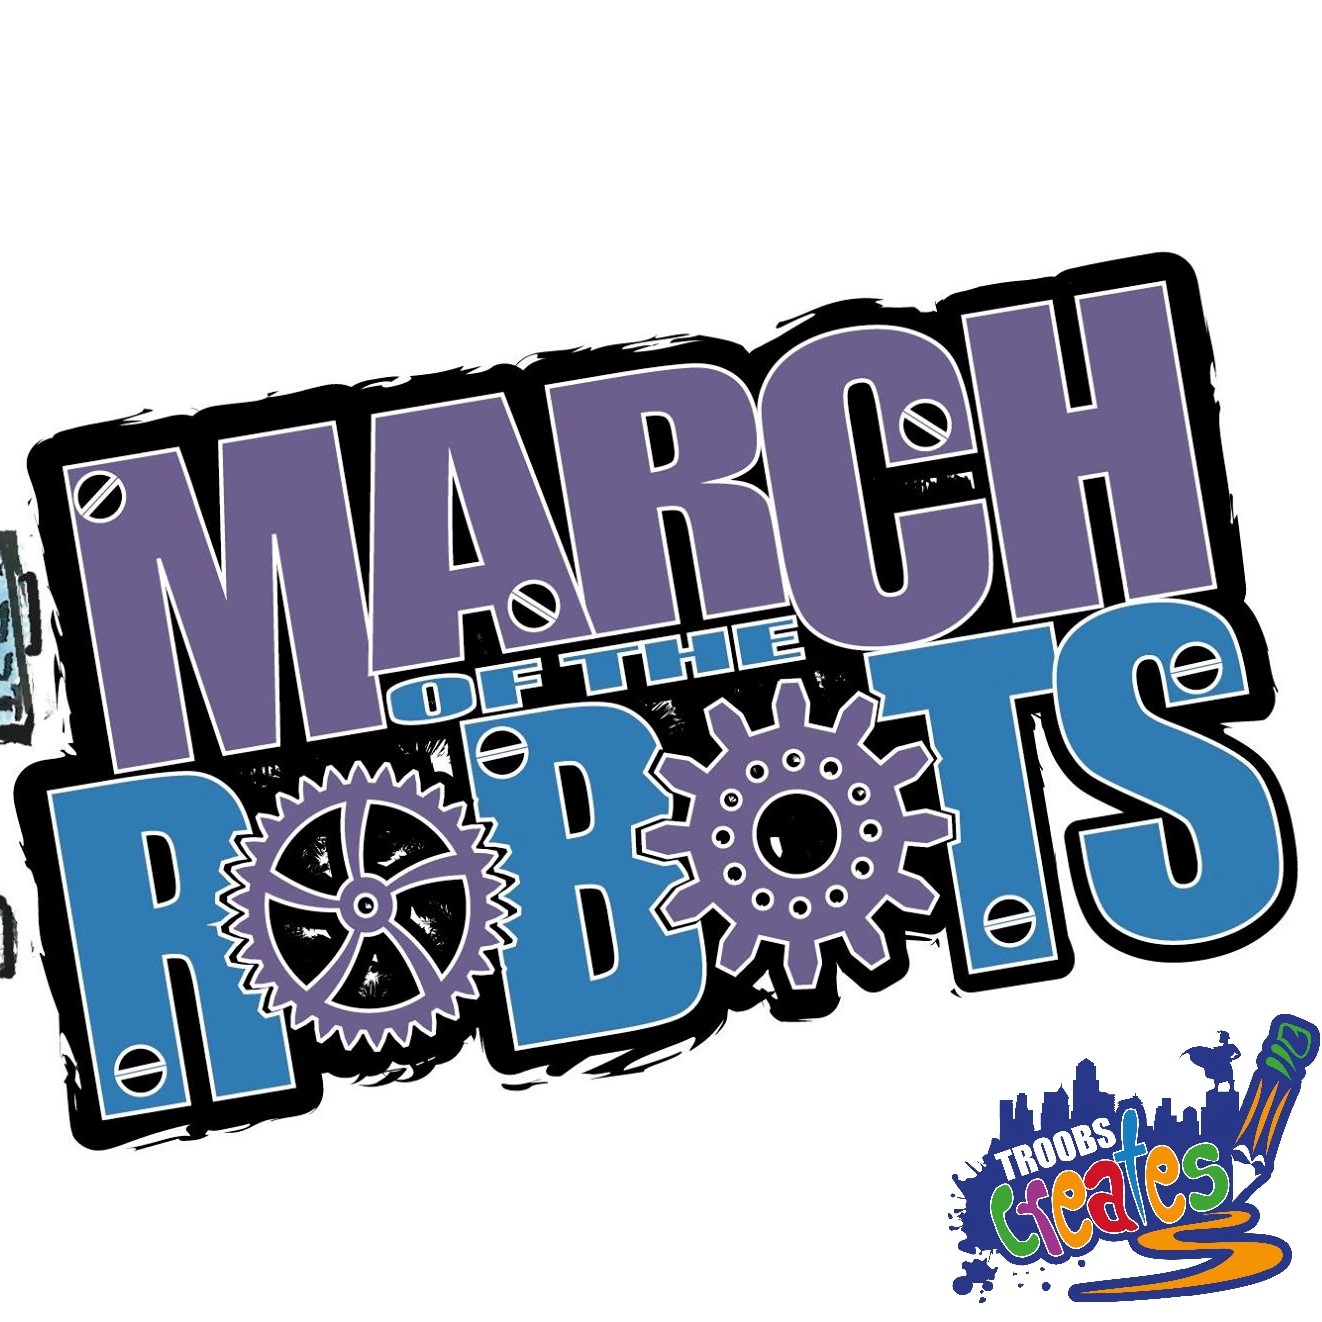 Series 5, Episode 2 - March Of The Robots